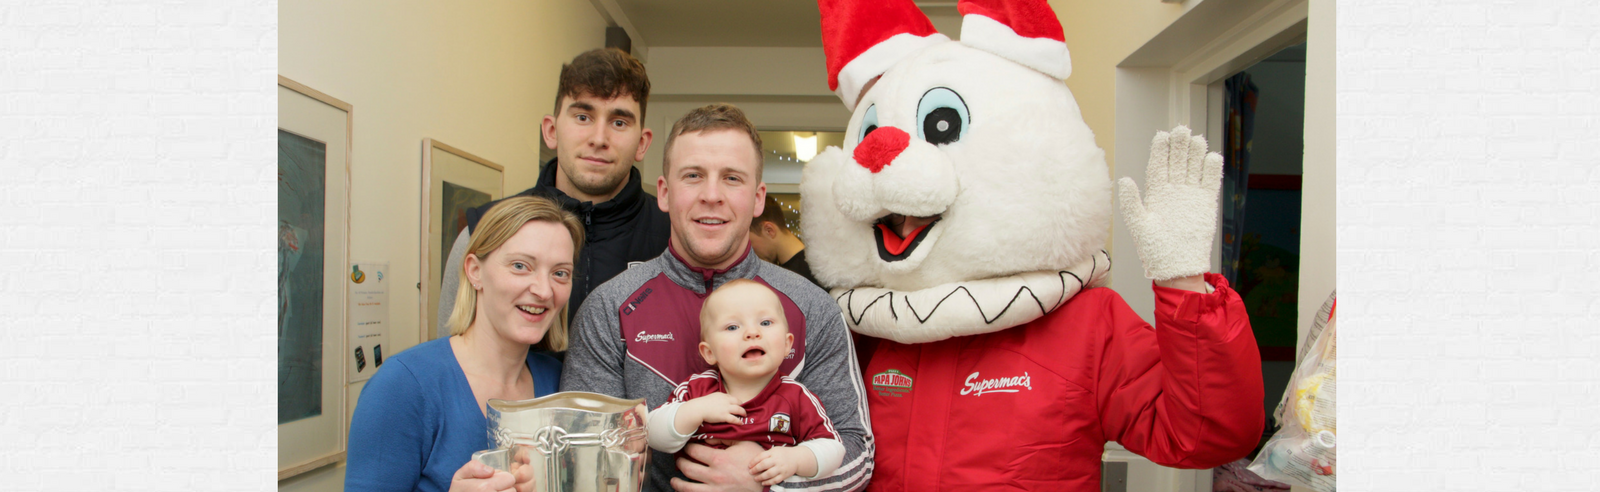 Supermac’s Bunny & Galway Hurlers Visit University Hospital Galway